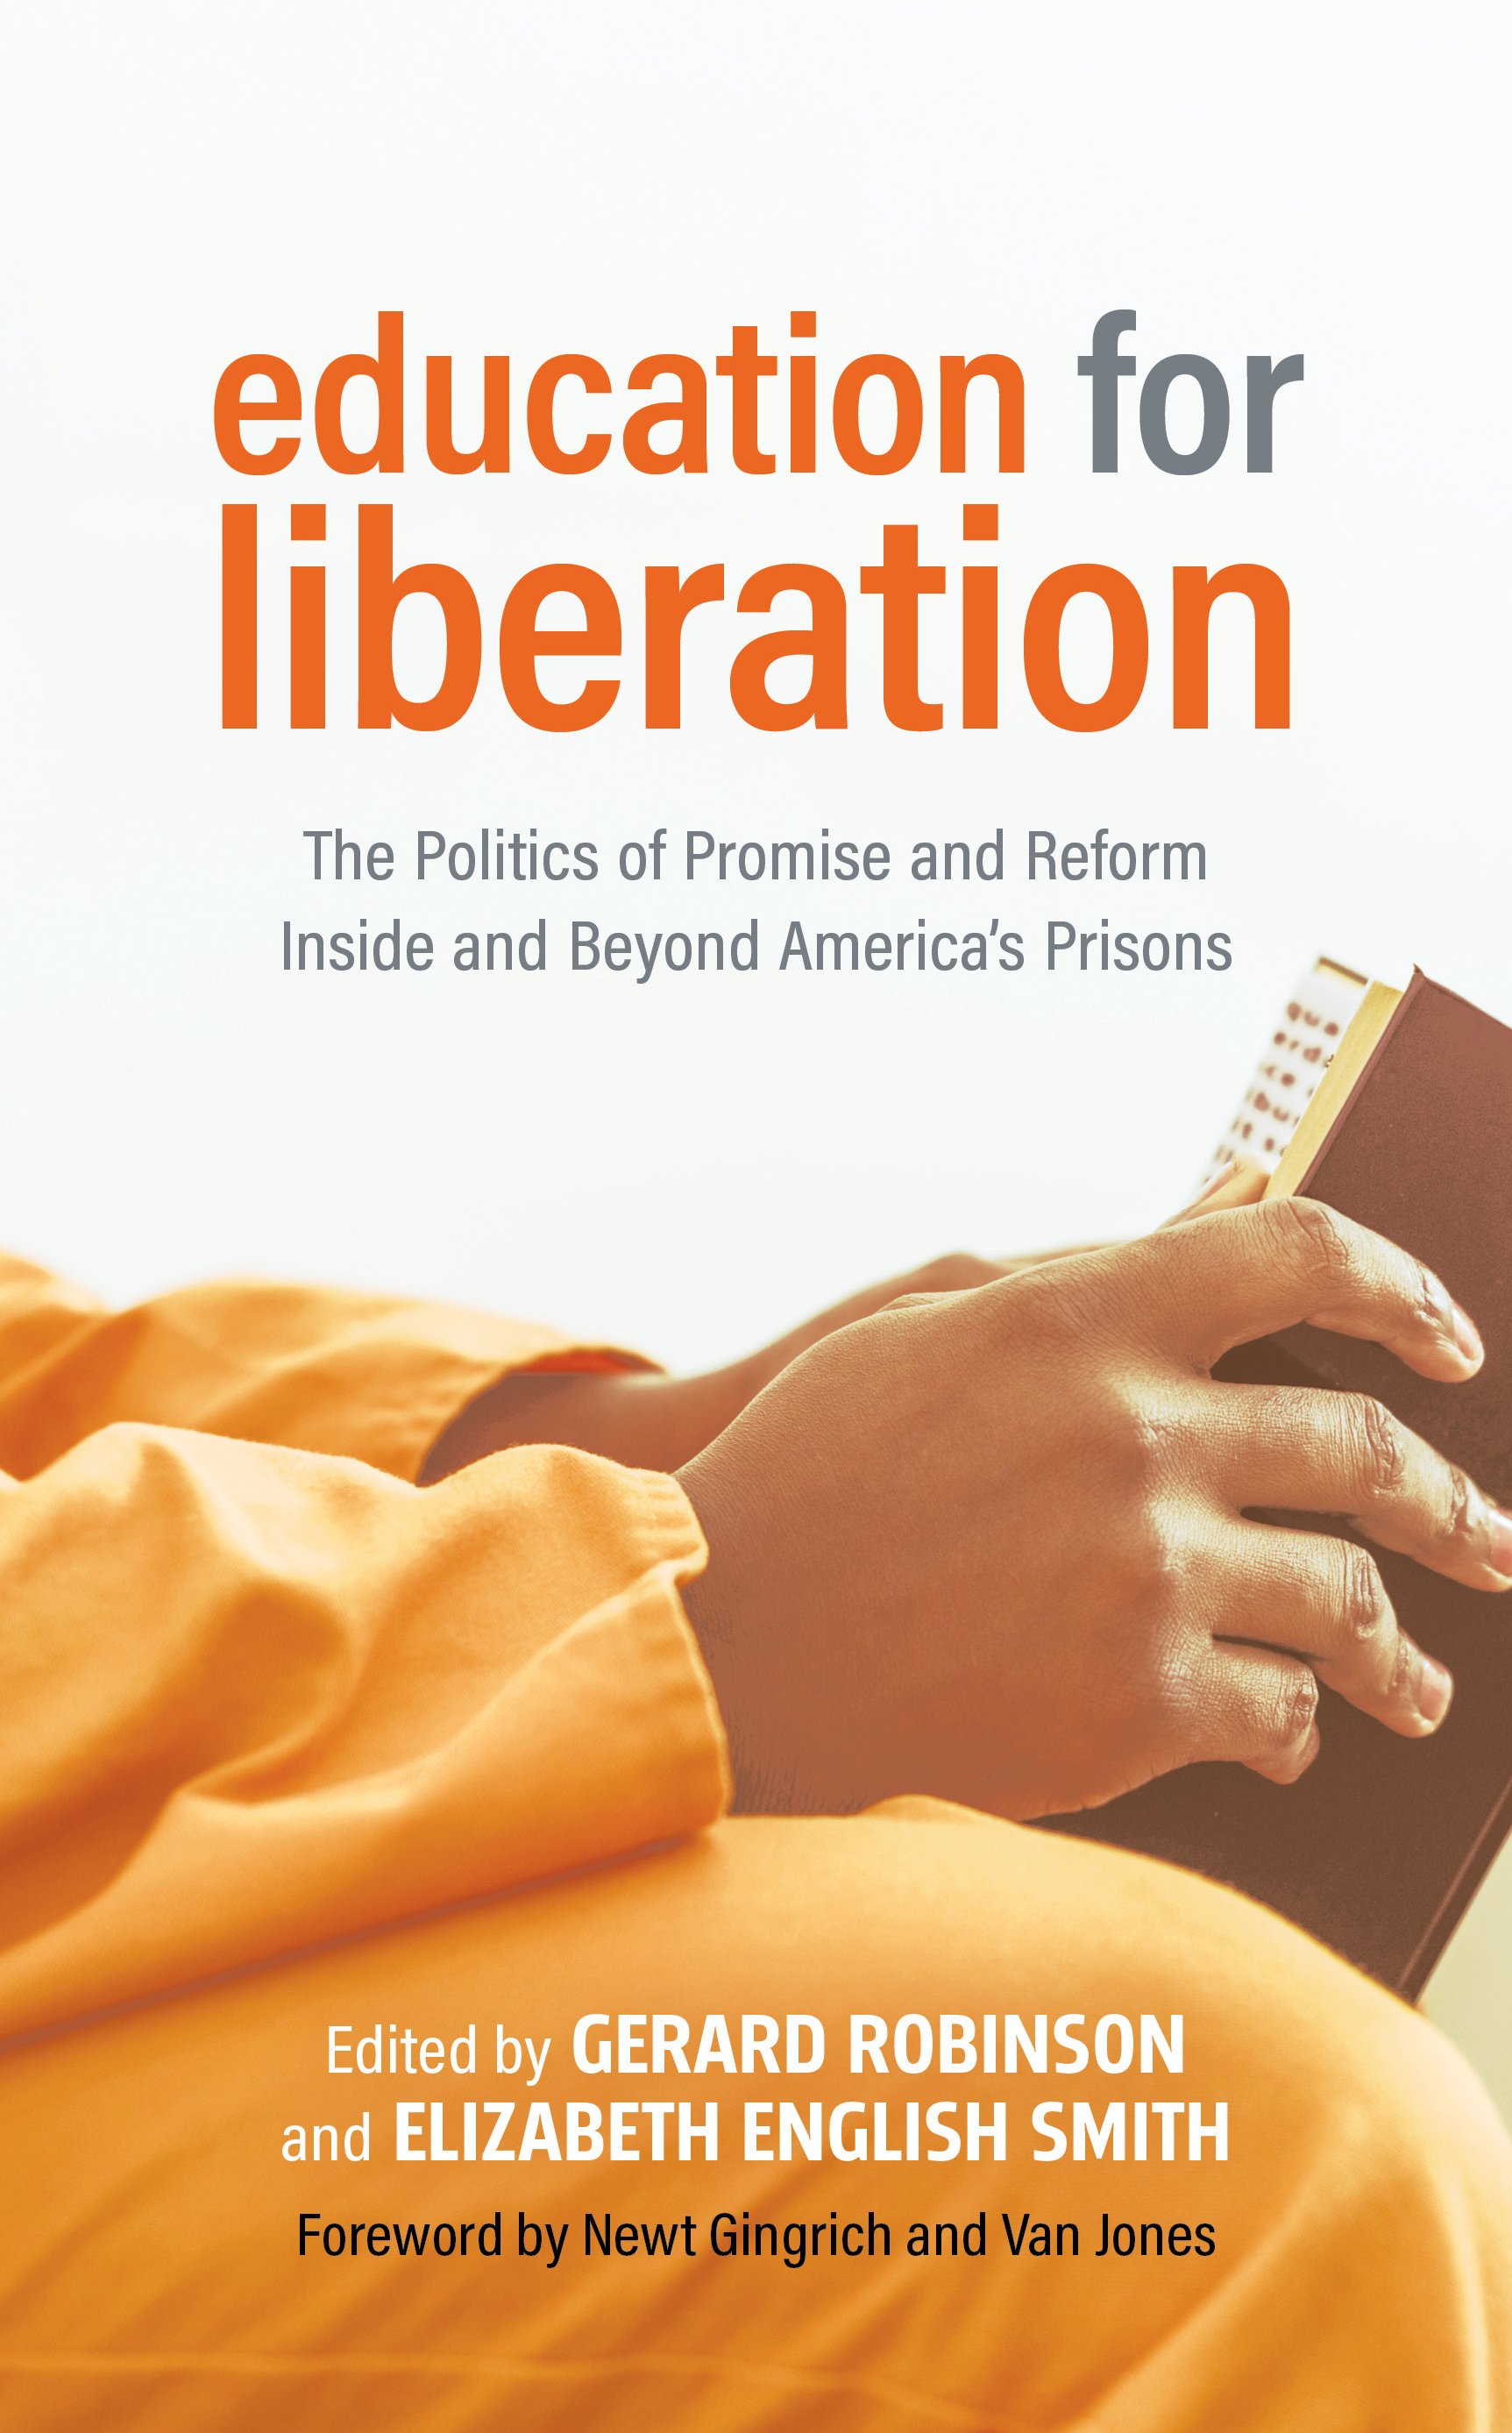 Cover of the book, "Education for Liberation: The Politics of Promise and Reform Inside and Beyond America's Prisons"